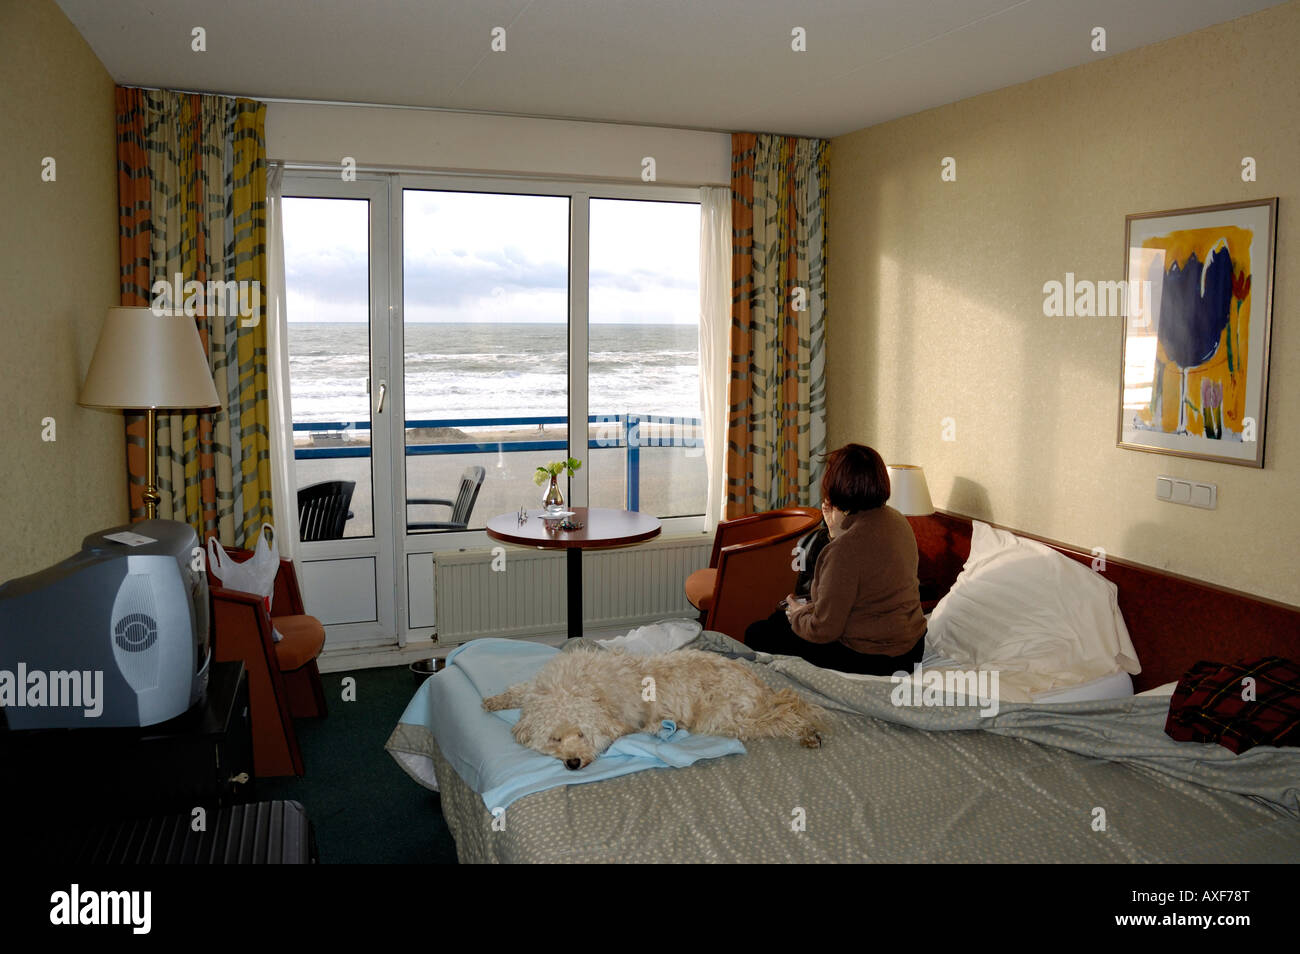 Interior of small seaside hotel room on the North Sea coast in Holland. Stock Photo